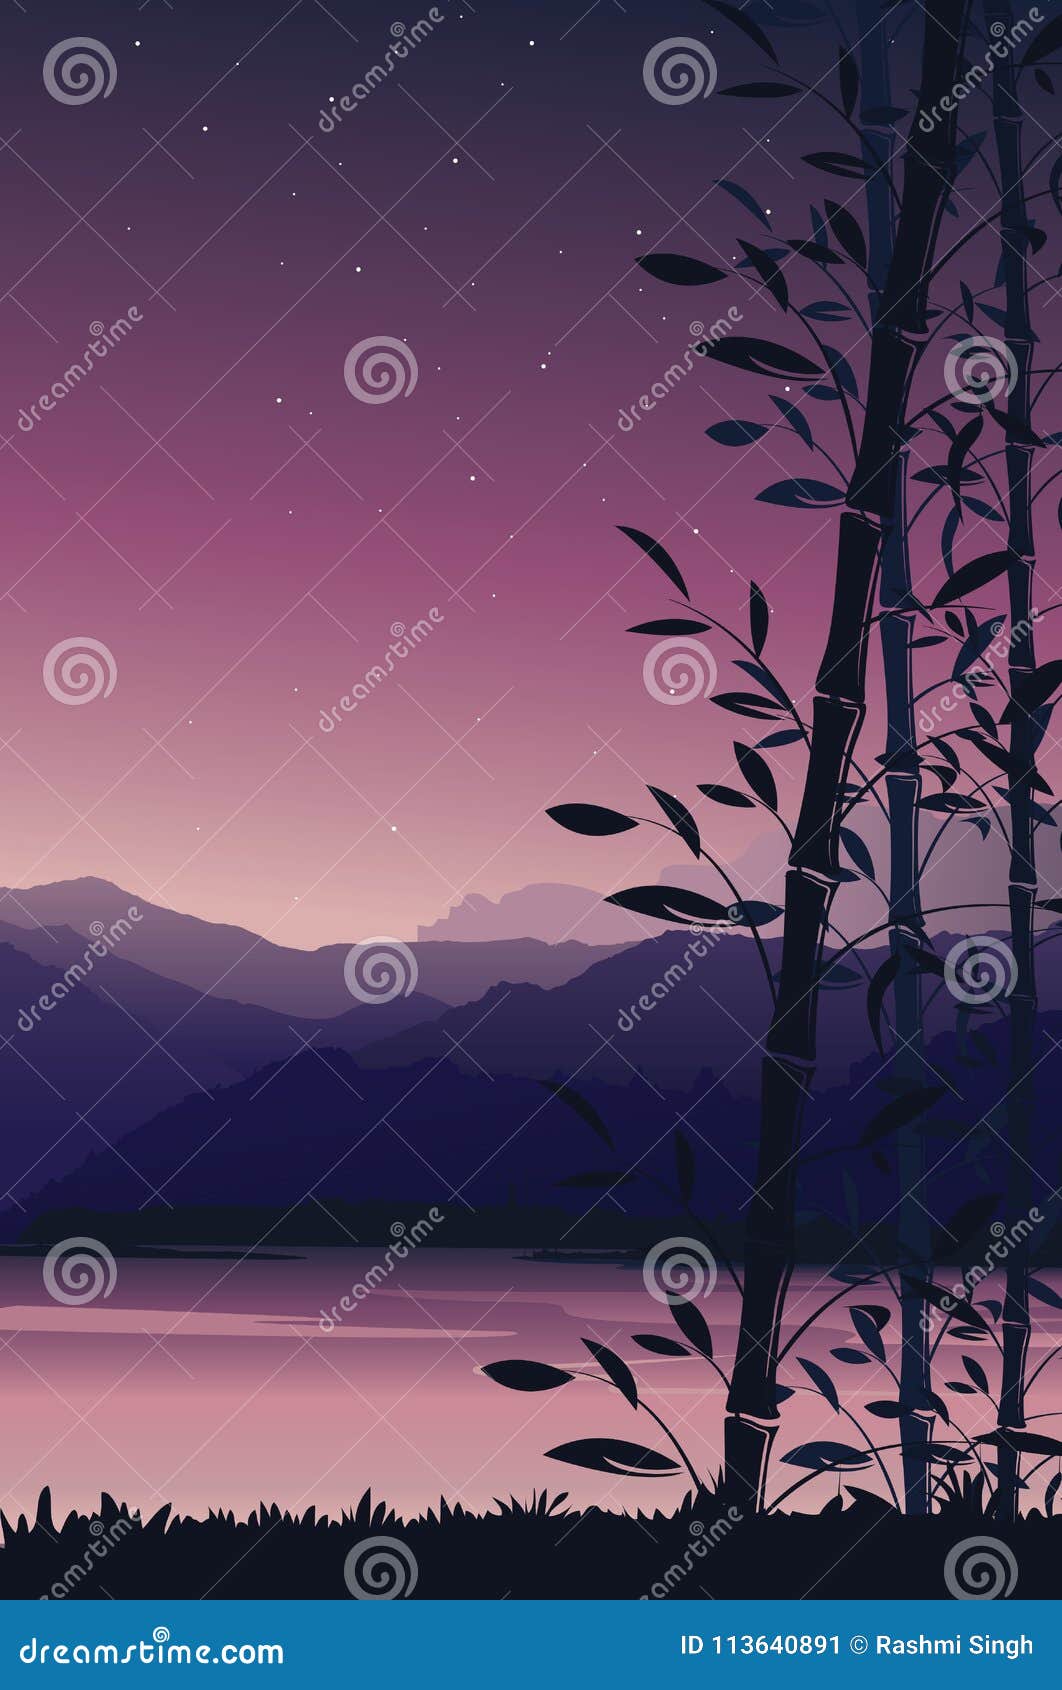 Scenery Mobile Wallpaper, Nature Background with Bamboo Portrait View Stock  Vector - Illustration of hill, mountain: 113640891